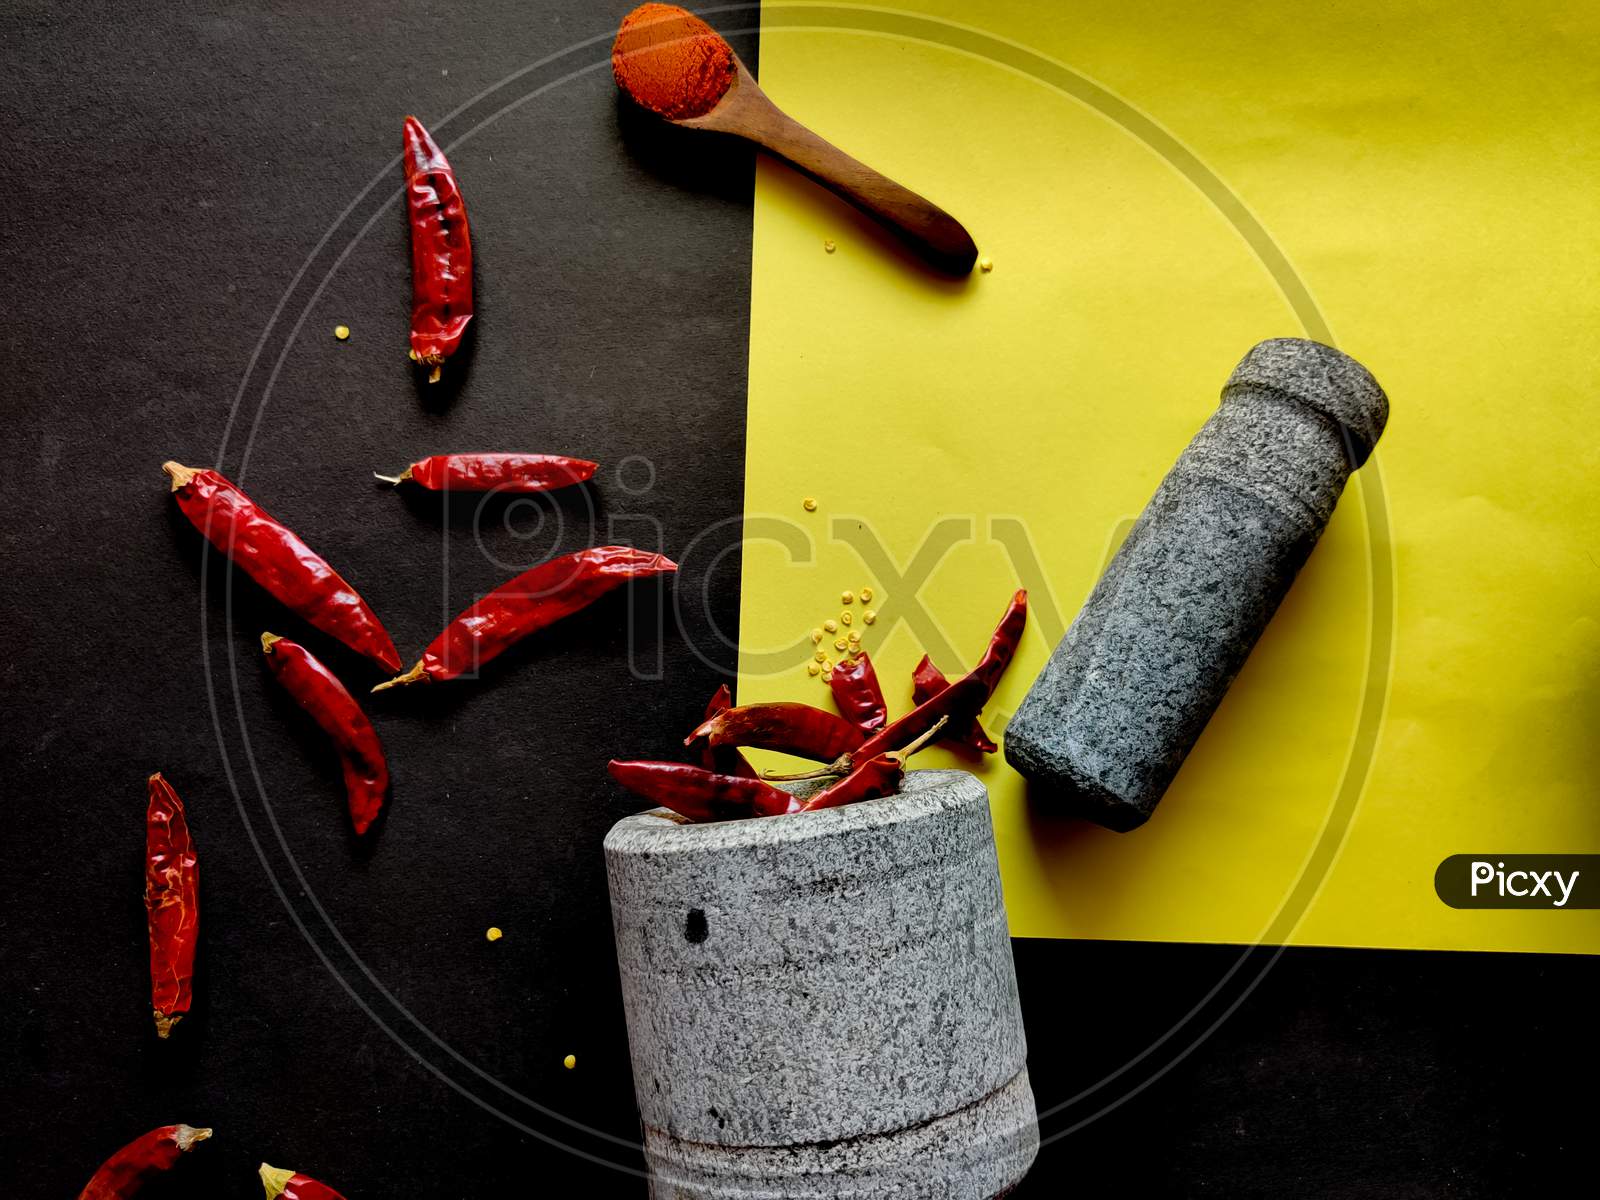 Stone Made Of Mortar And Pestle Is Ready To Crush The Red Chillies. Isolated On Yellow And Black Background.